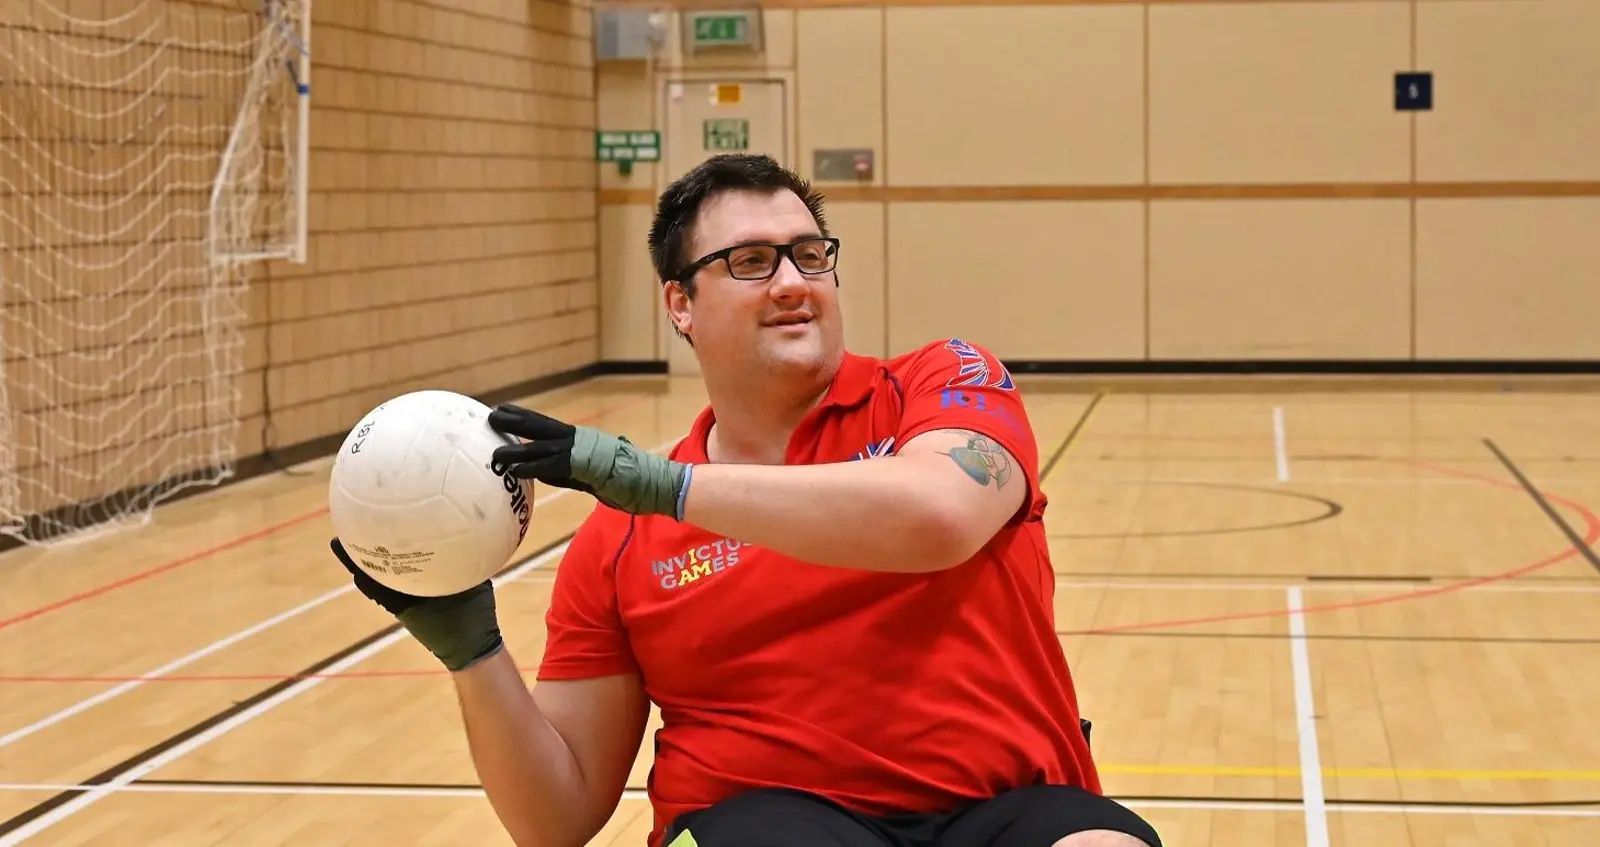 Matthew Trigg playing wheelchair rugby, wearing a red Team UK t-shirt